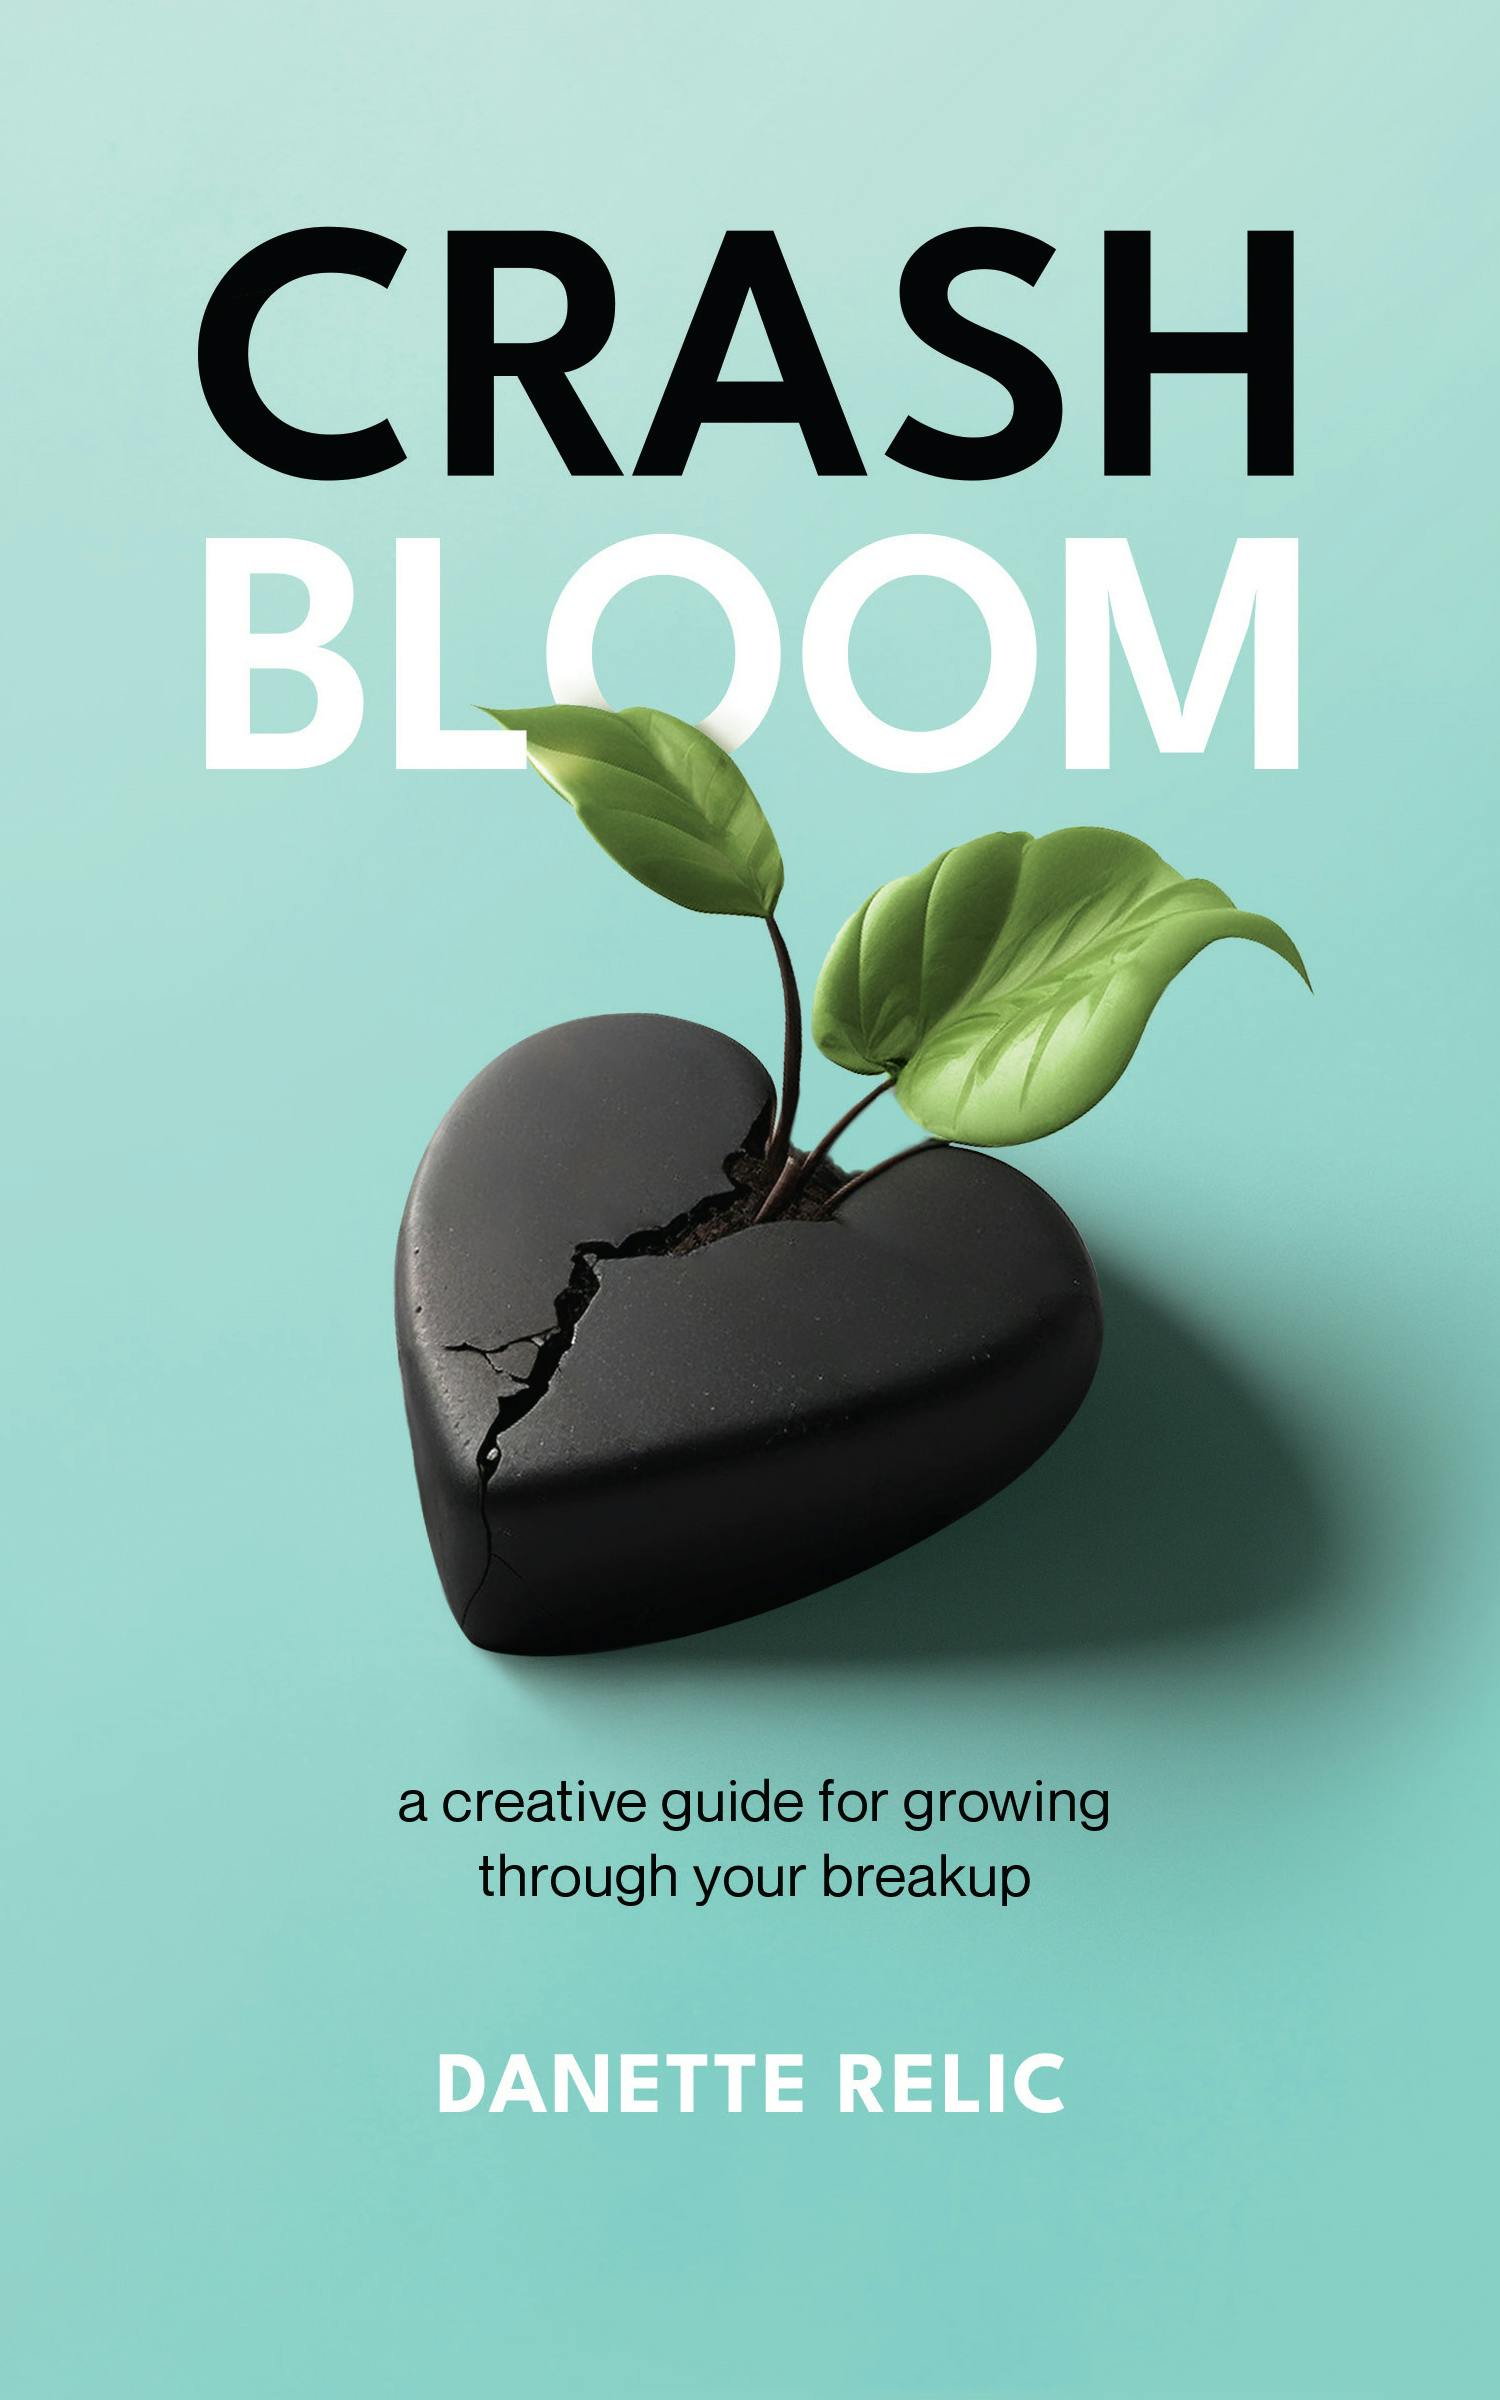 The cover of Crash Bloom has a green background. A cracked blackened heart has a small leafy plant growing out of the damage.